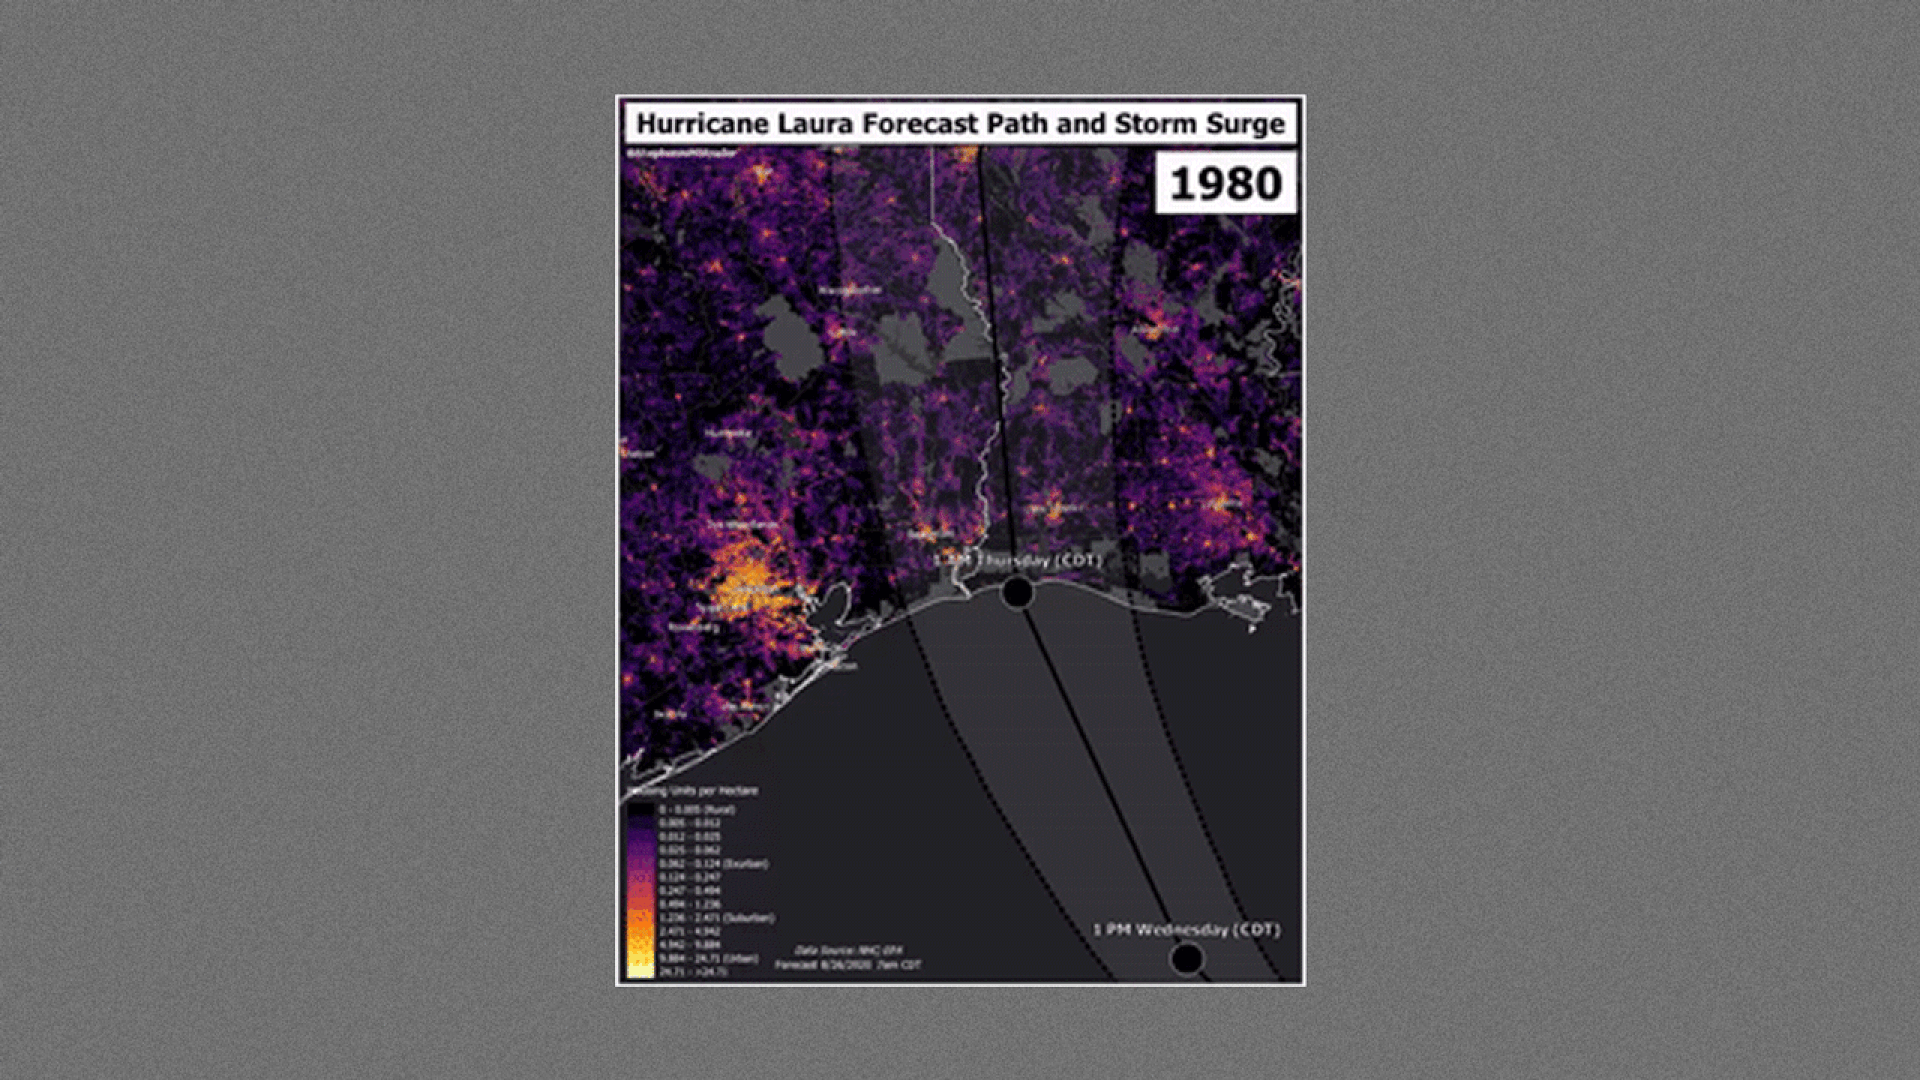 GIF of increase in population density in the path of Hurricane Laura over past 40 years.